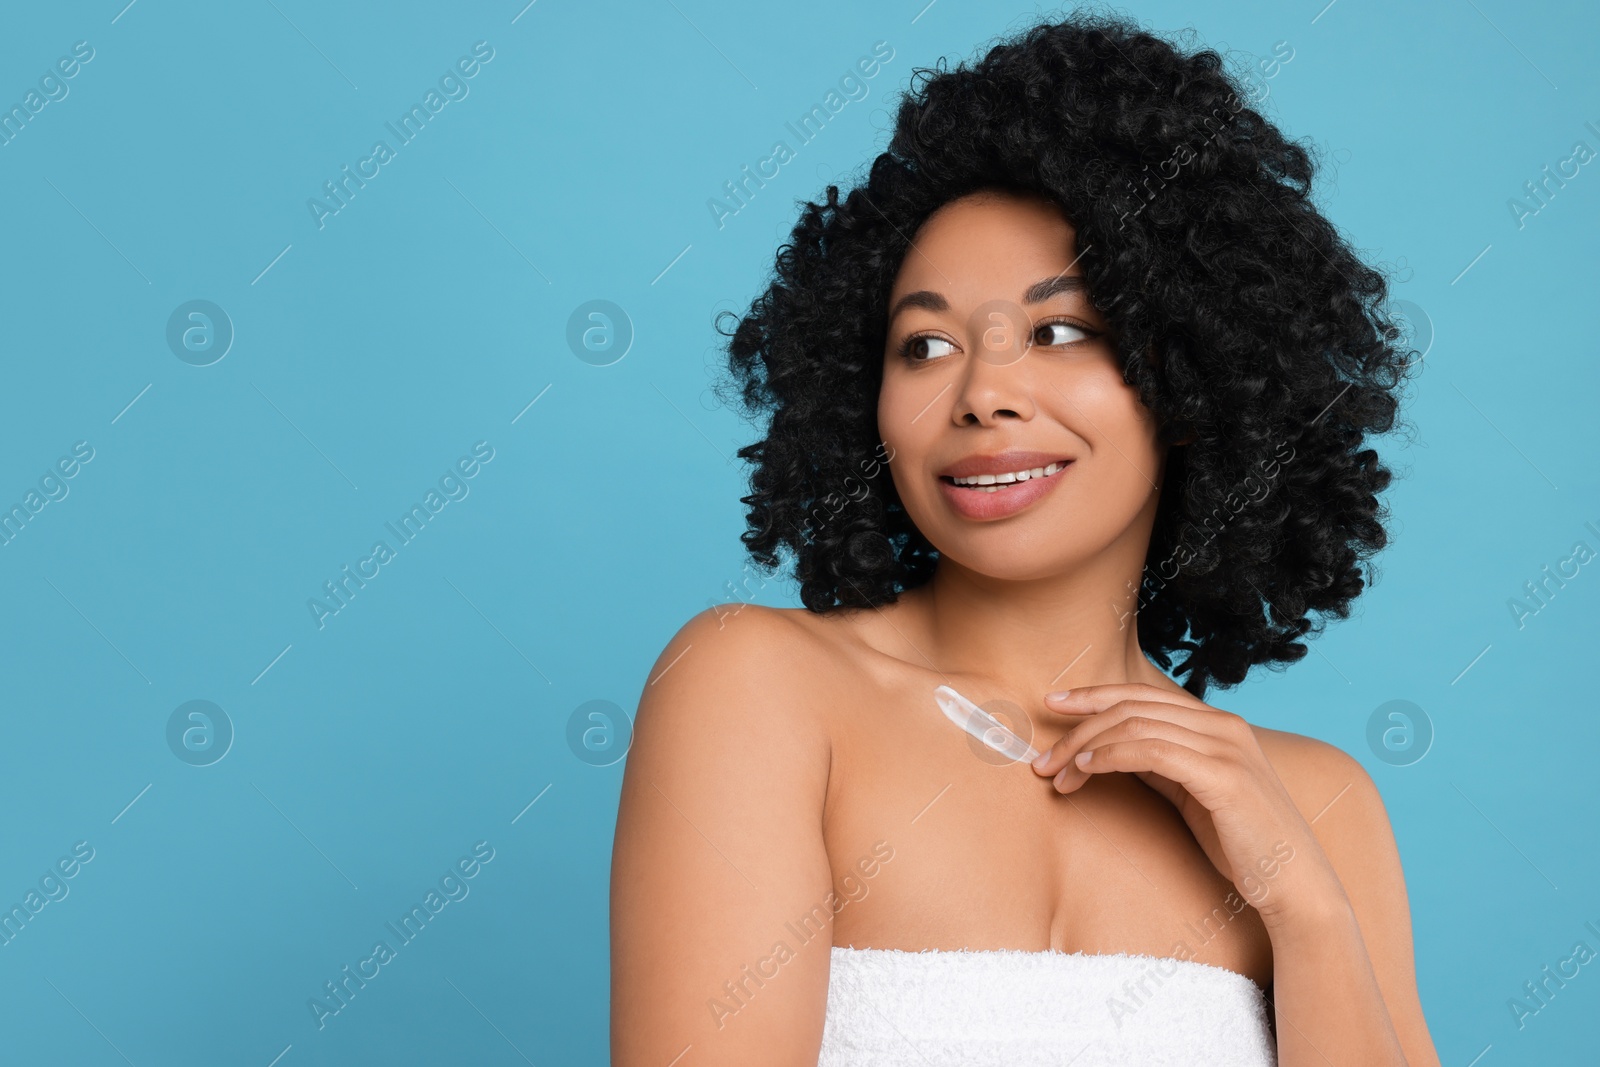 Photo of Young woman applying cream onto body on light blue background. Space for text